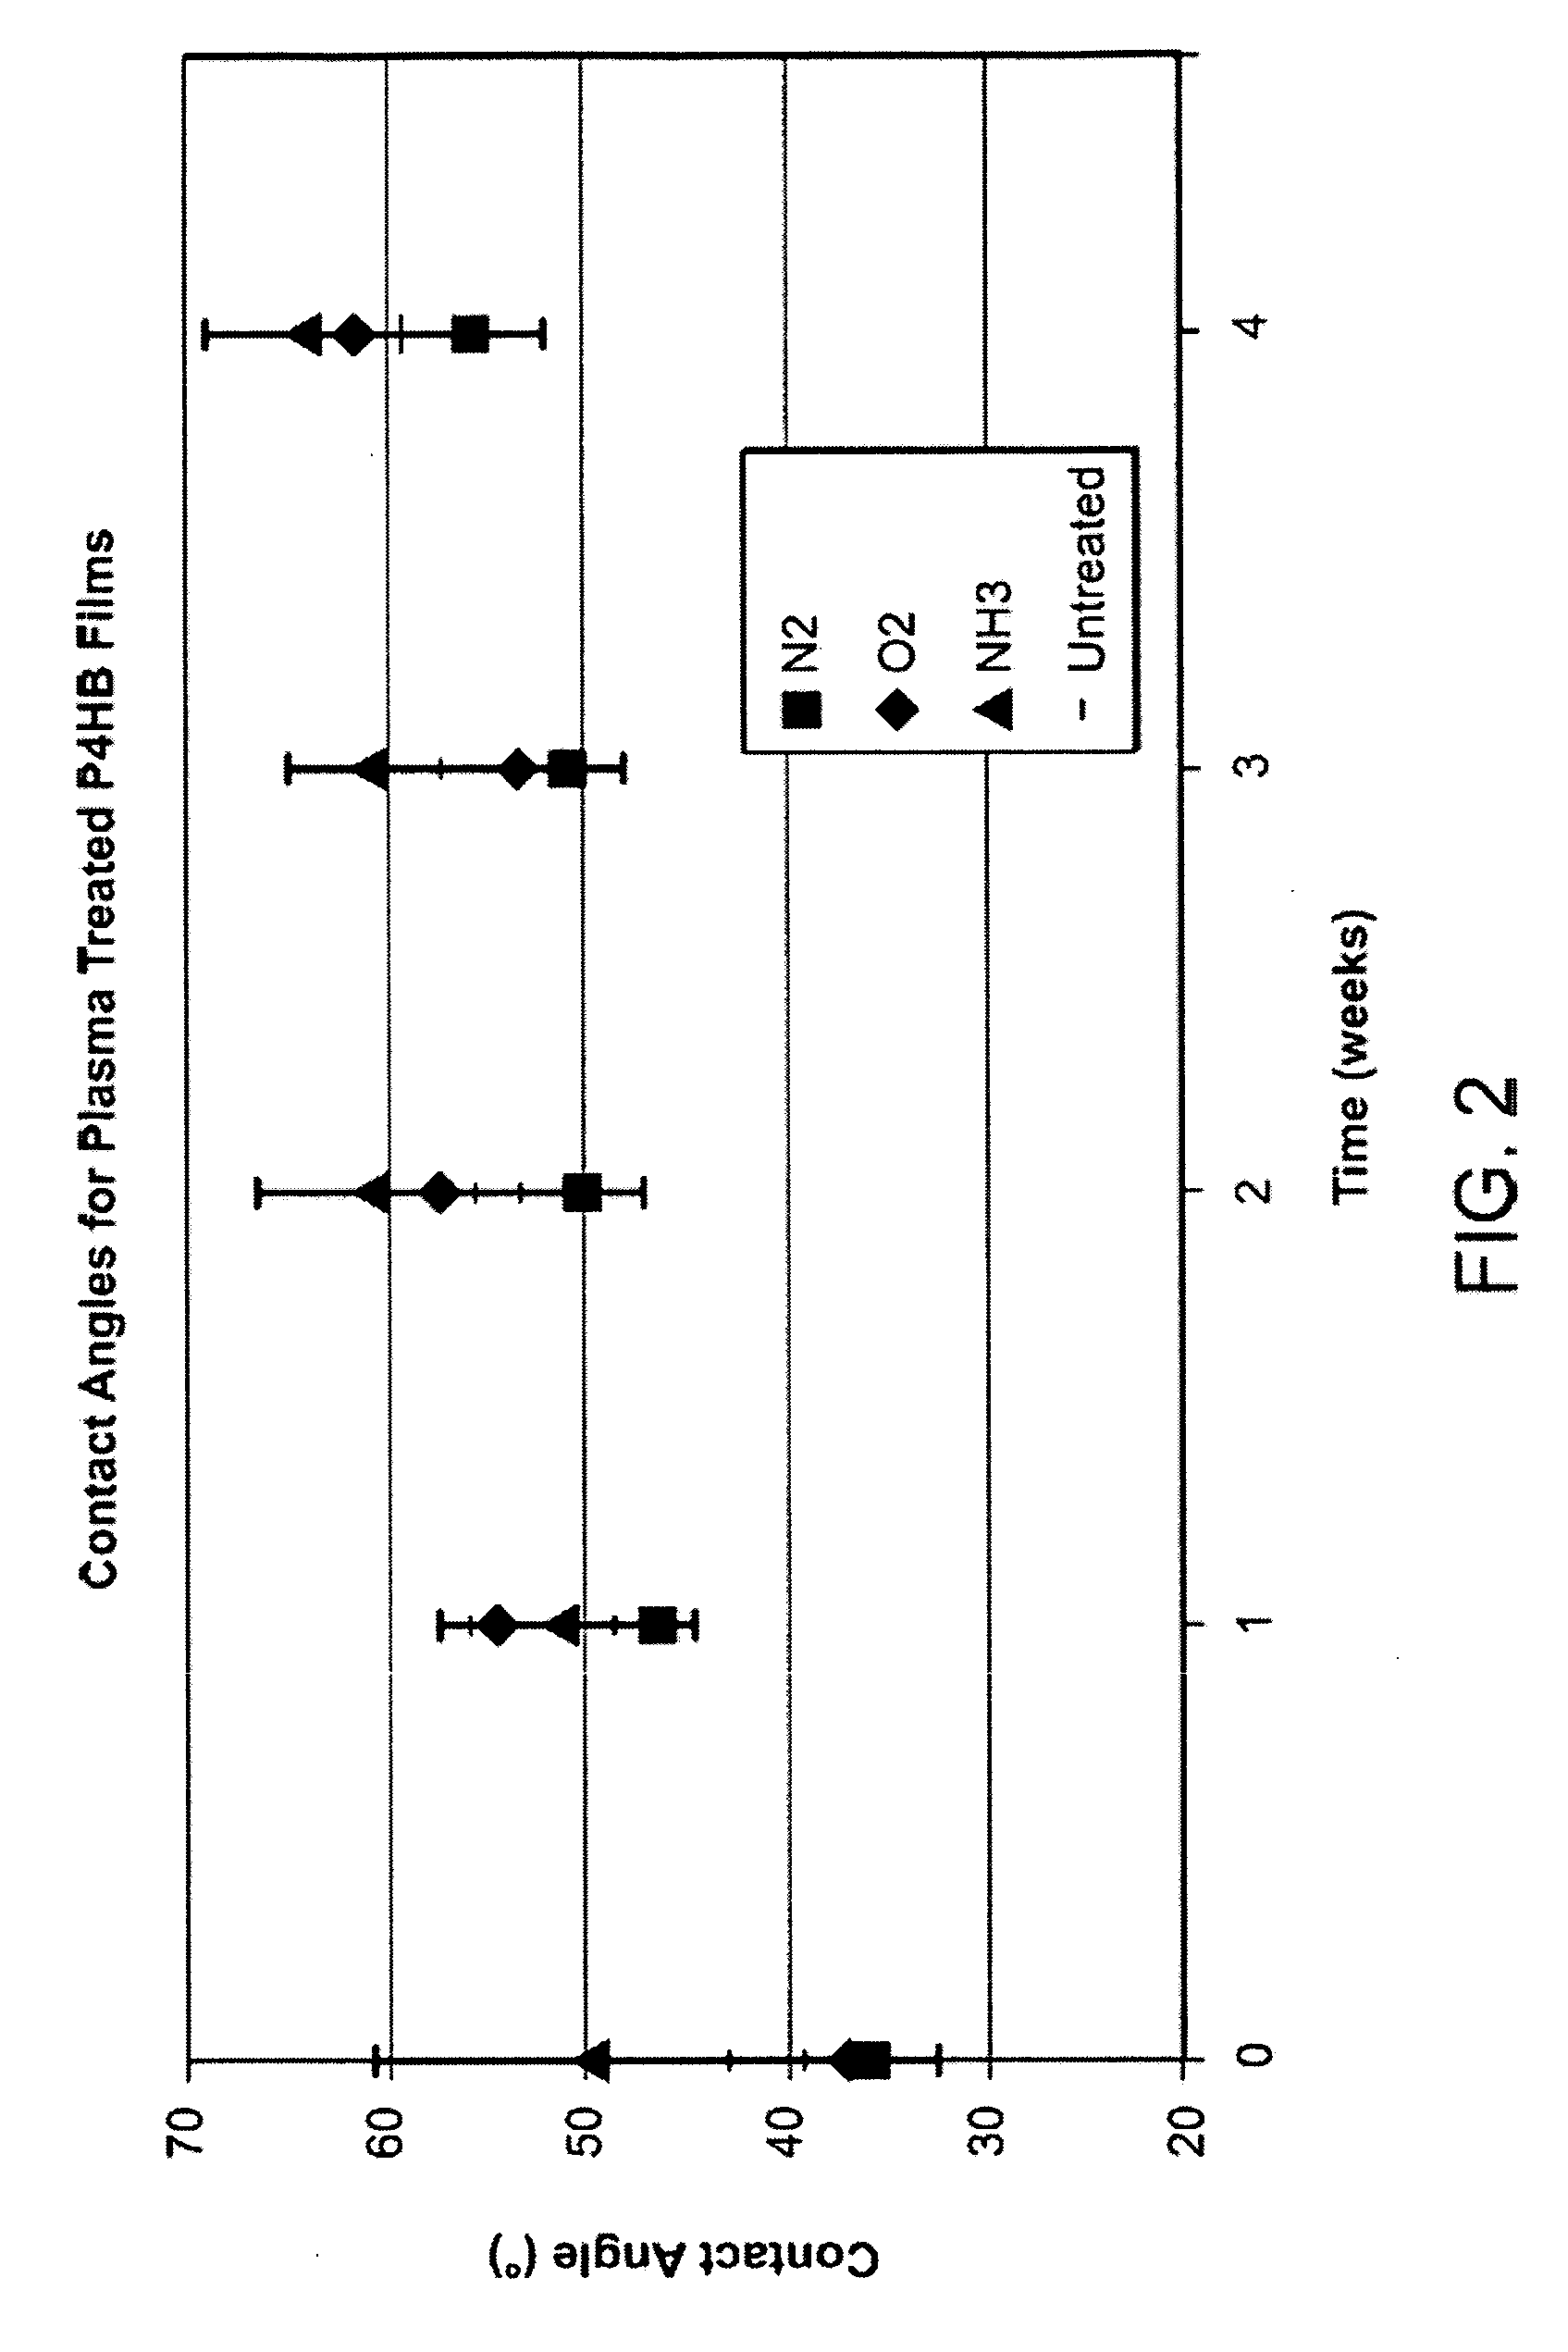 Method for modifying a medical implant surface for promoting tissue growth